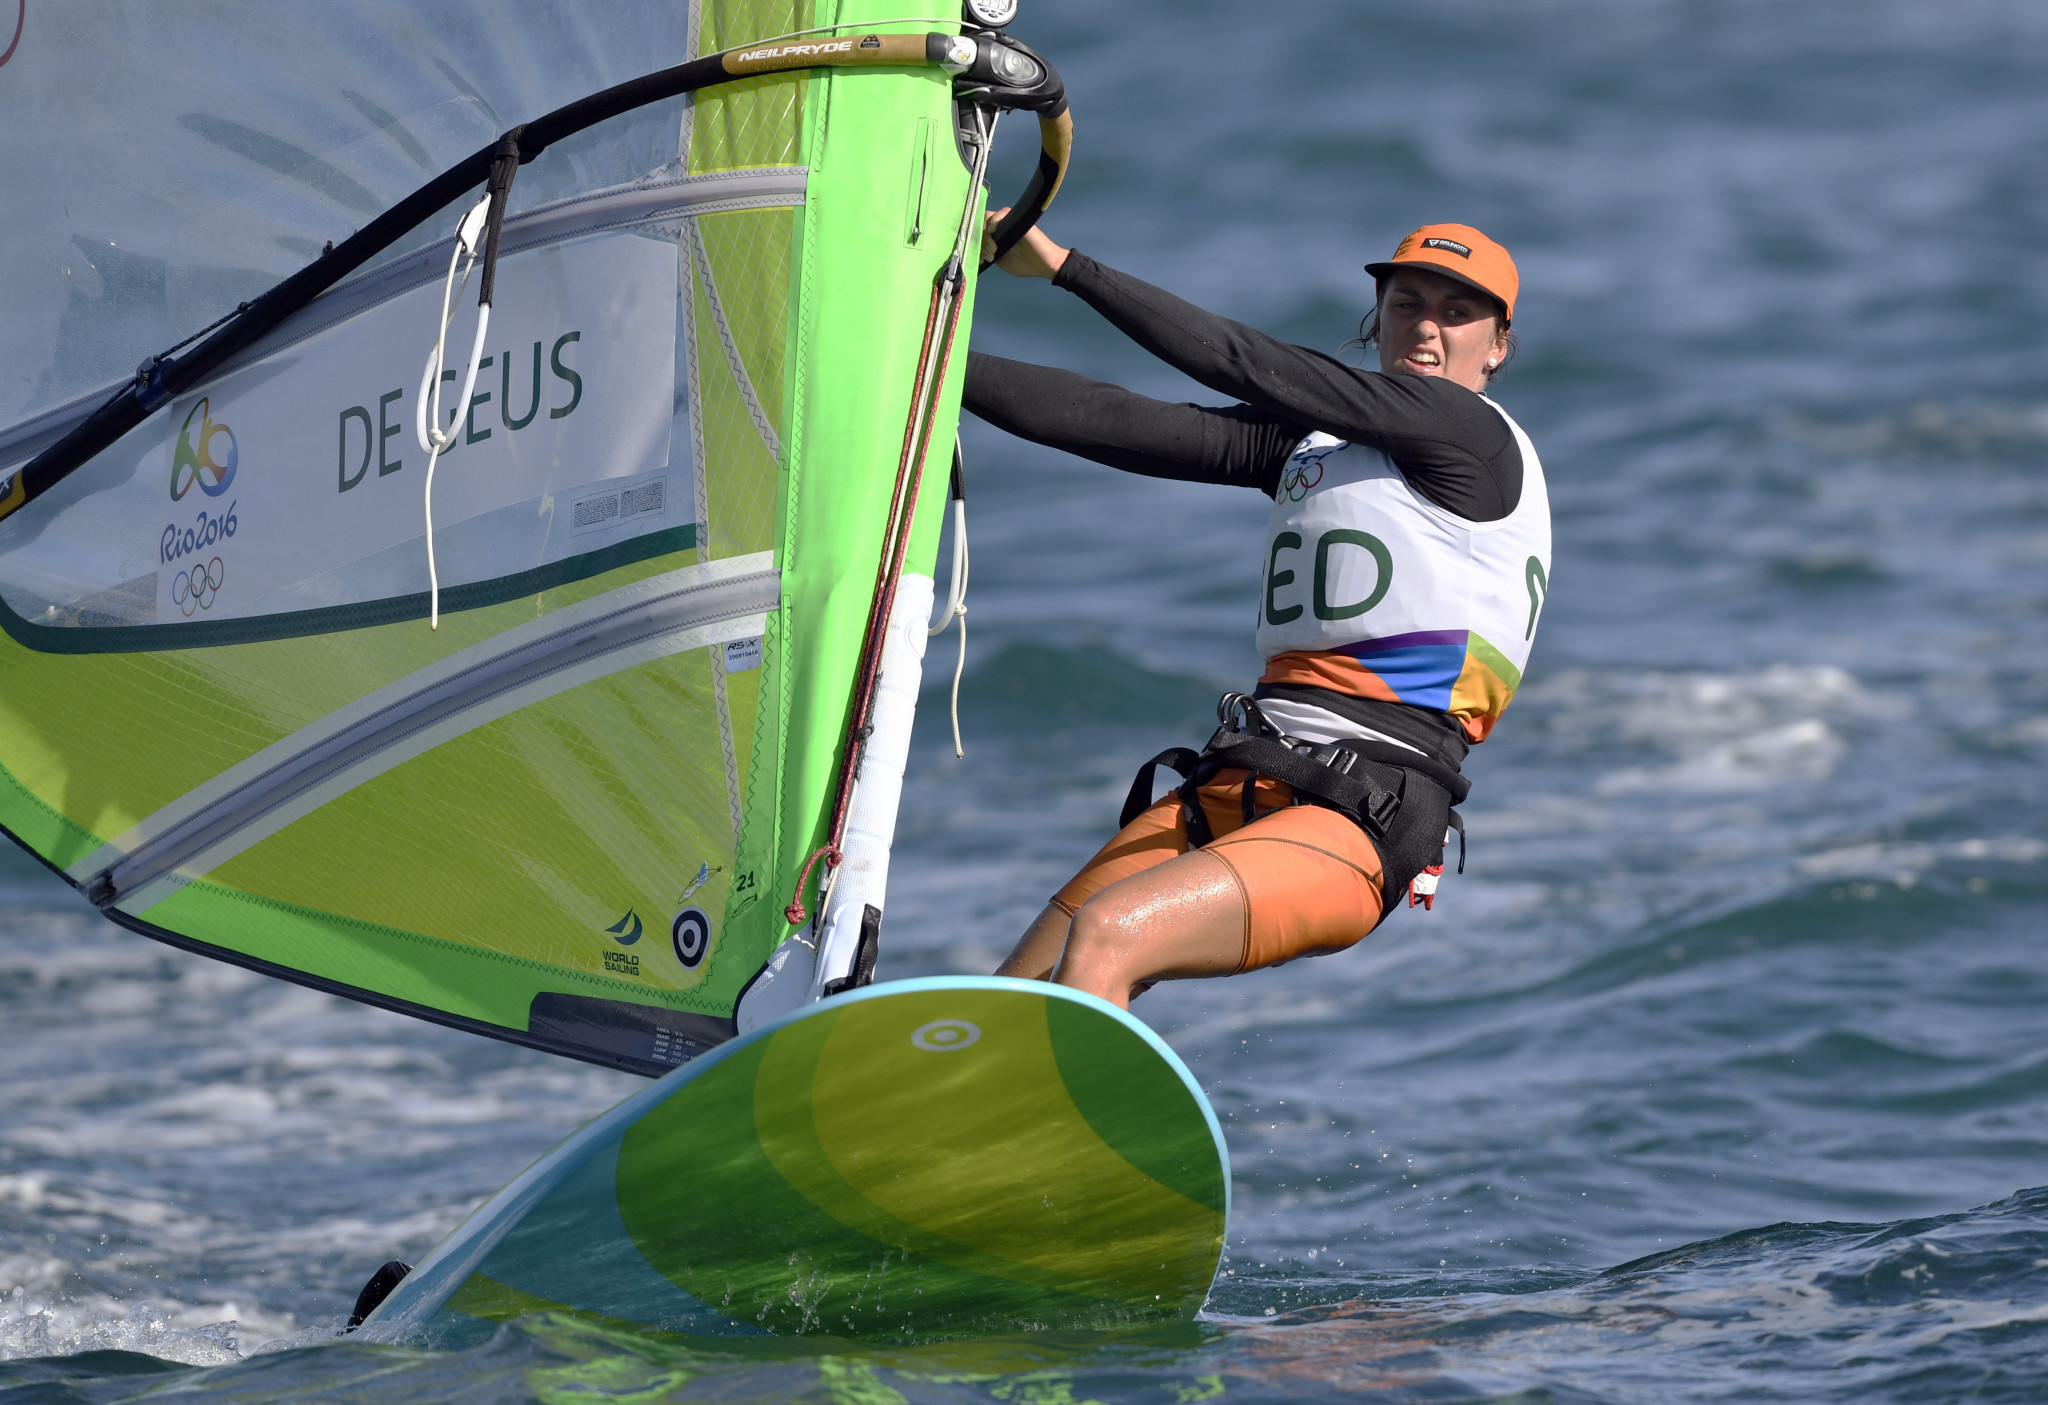 The Netherlands' Lilian de Geus remains in contention for success at the RS:X World Championships in Sorrento ©Getty Images